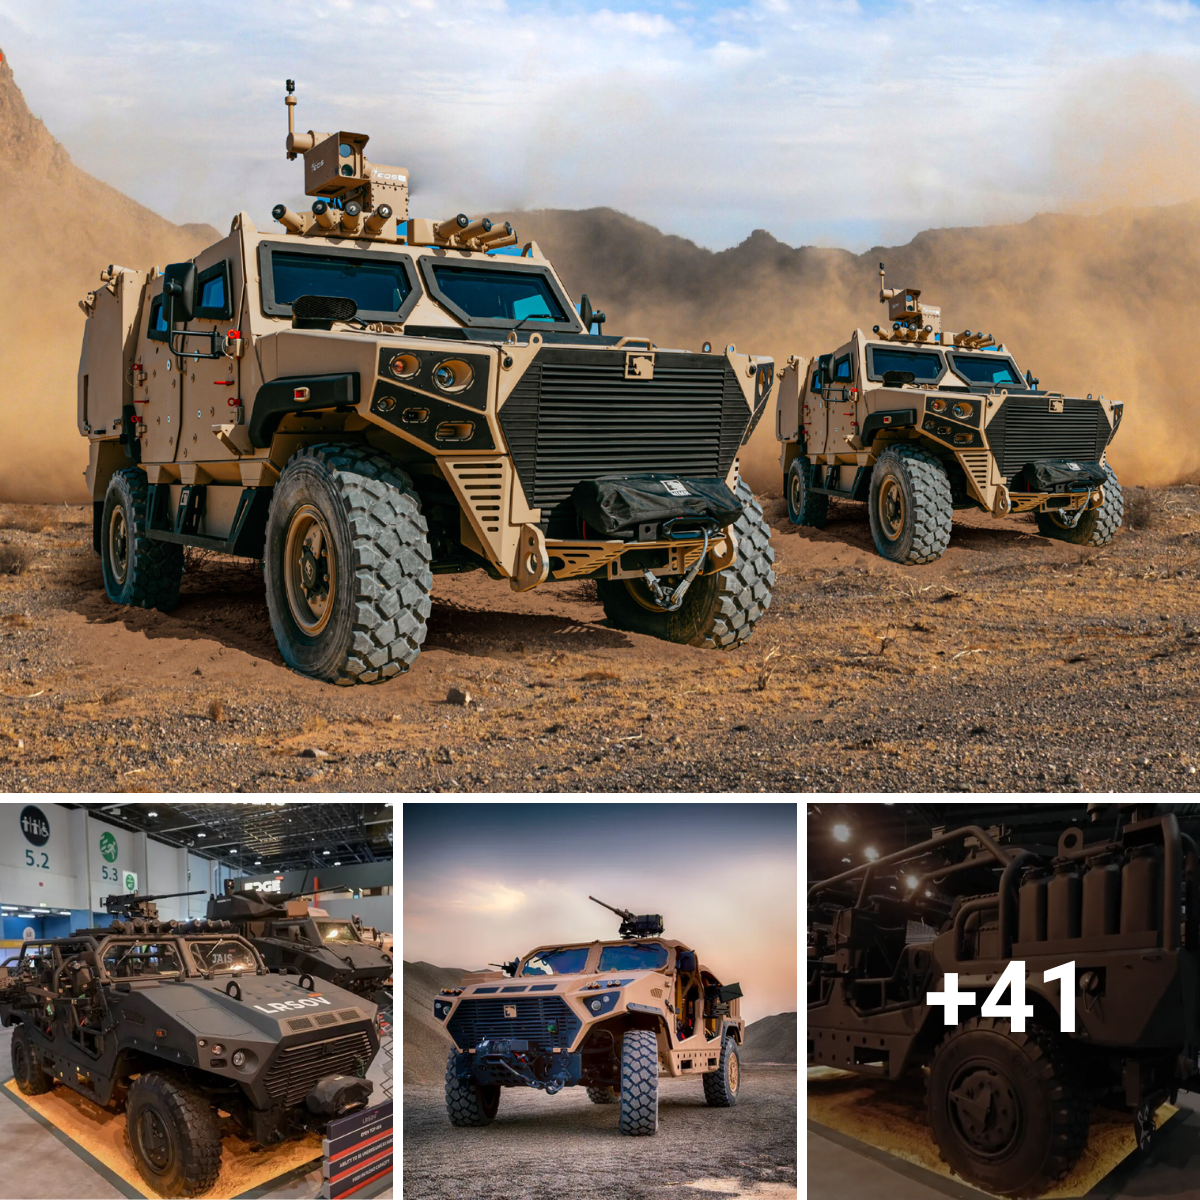 Revolutionizing capabilities, NIMR provides cutting-edge off-road scout and security vehicles.